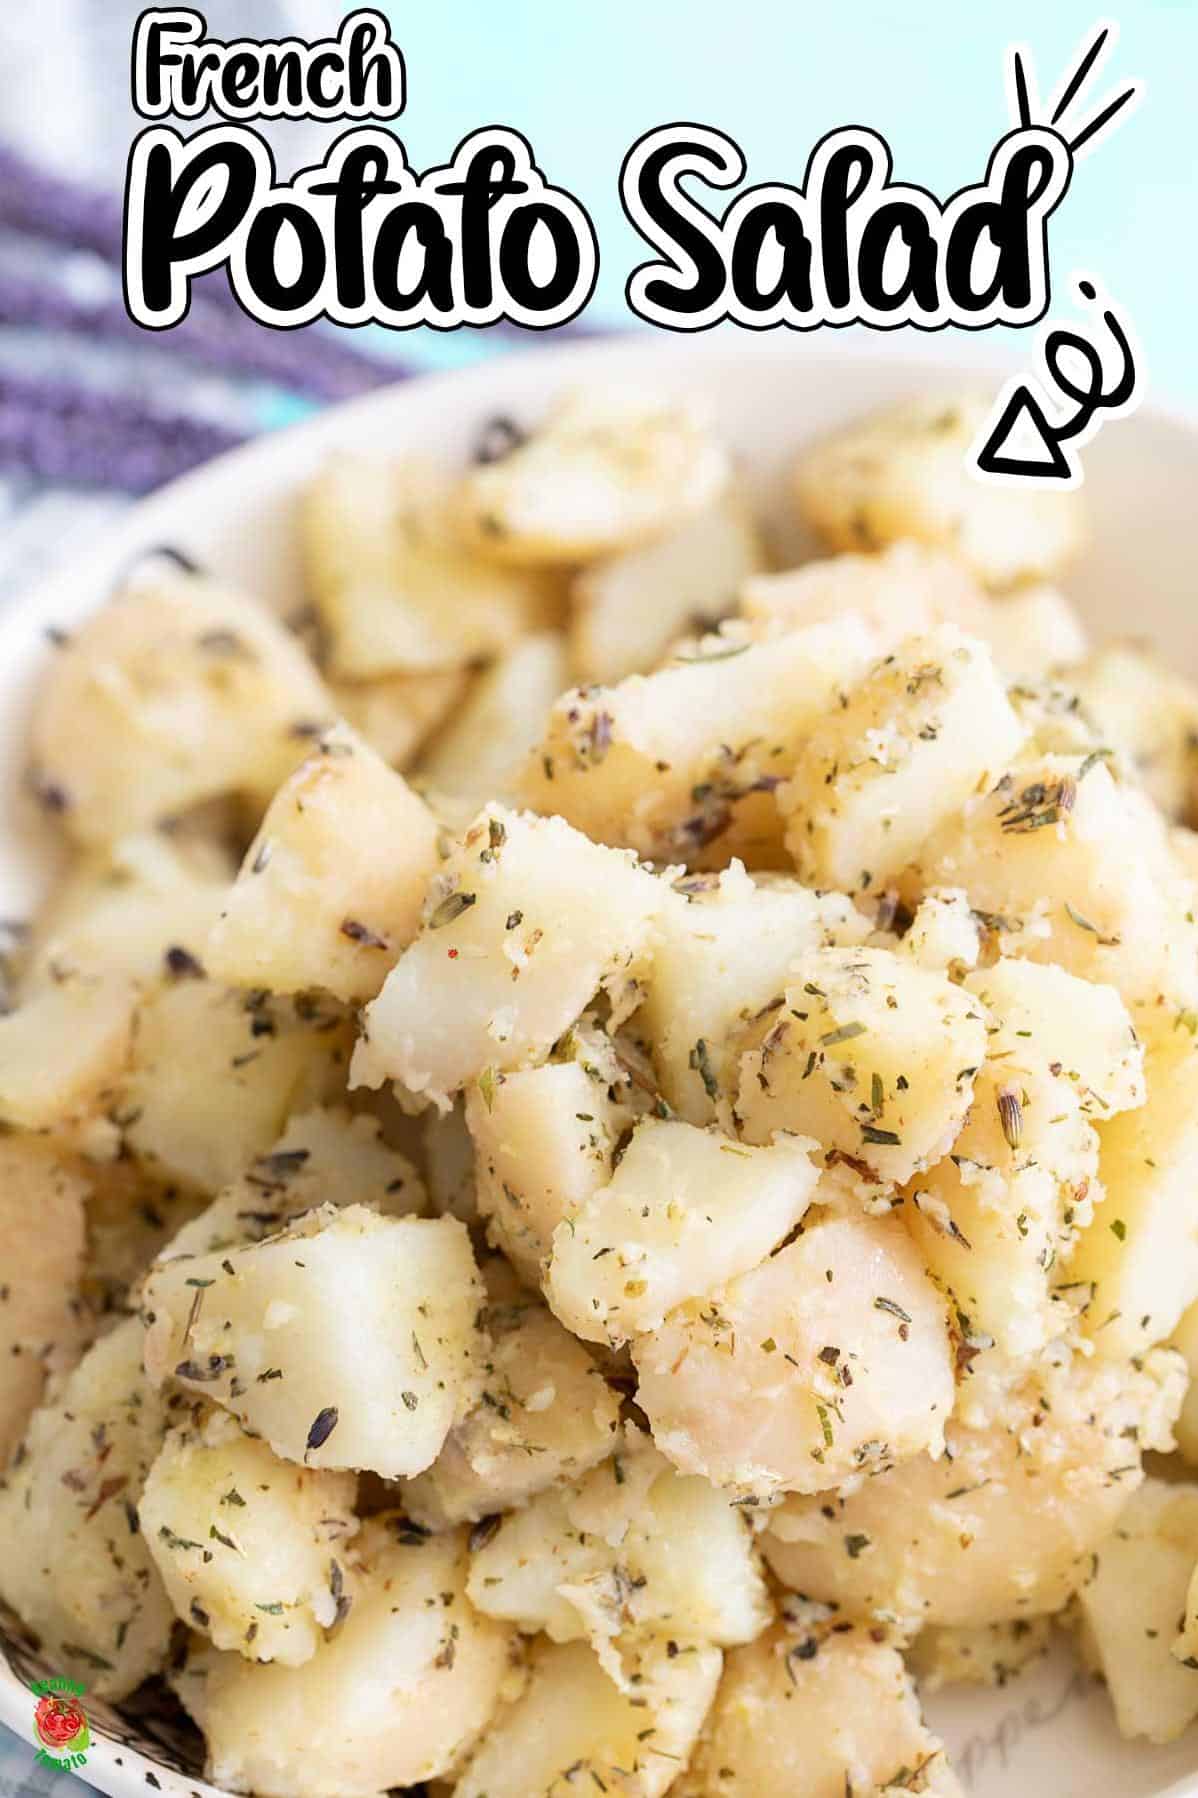  The tangy taste of this potato salad is perfect for those who like a bit of a kick!